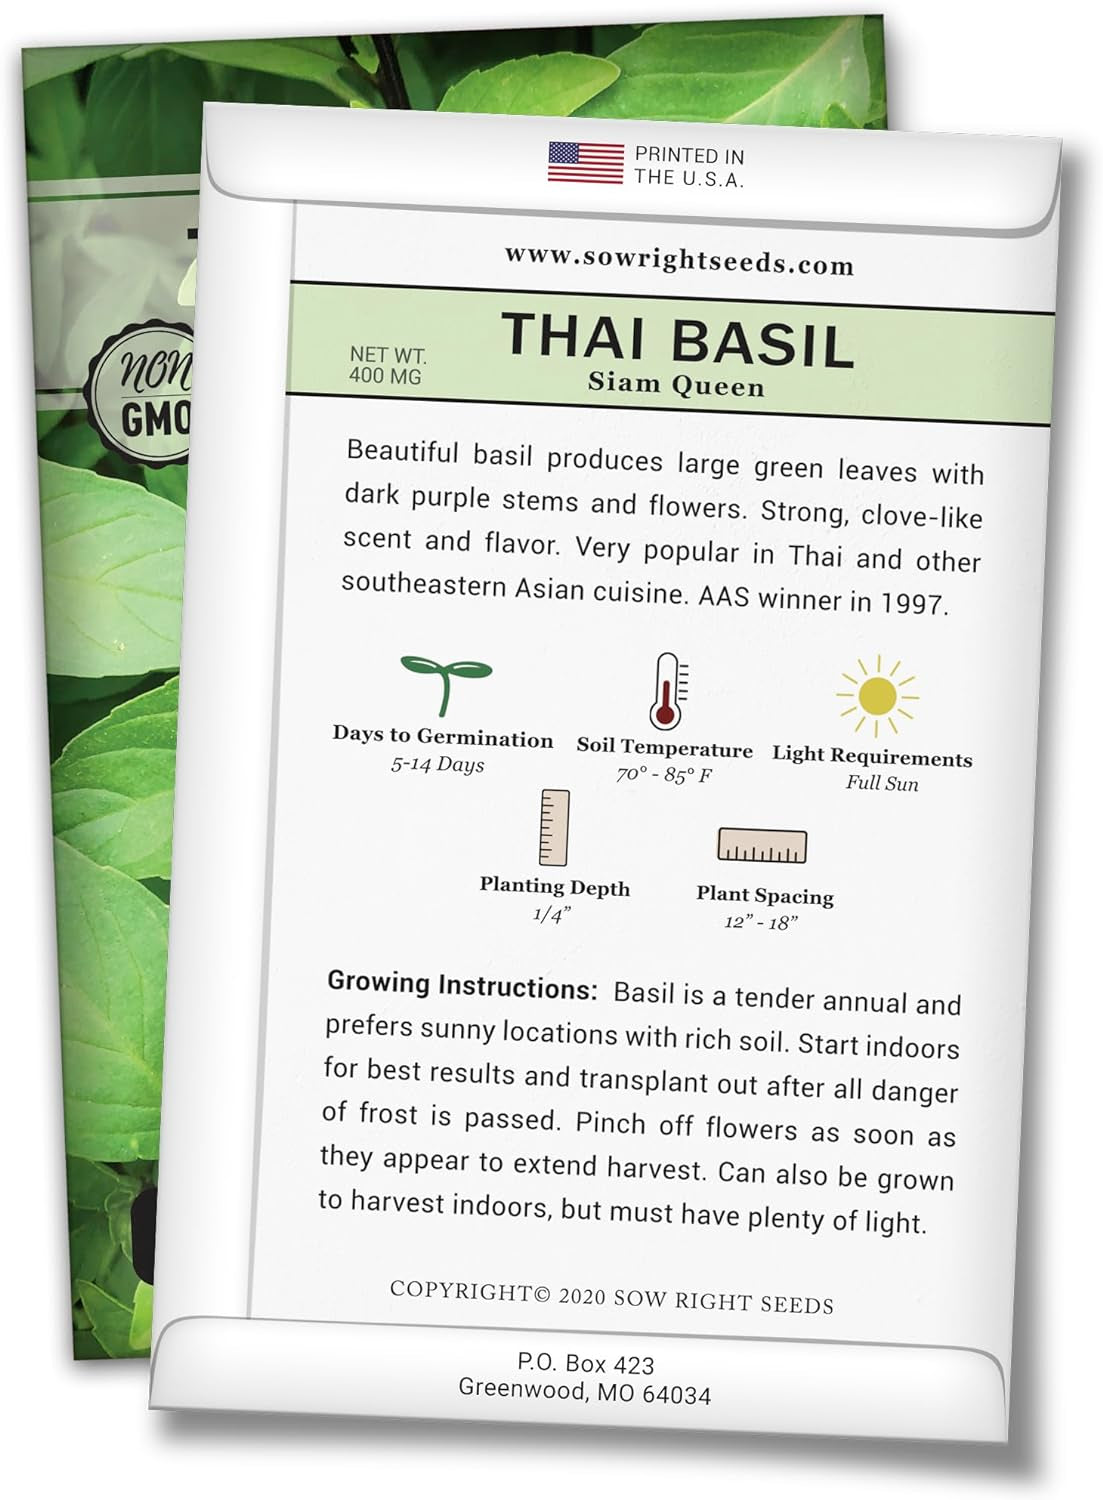 - Sweet Large Leaf Thai Basil Seed for Planting - Non-Gmo Heirloom Packet with Instructions to Plant a Kitchen Herb Garden - Indoors or Outdoor - Great for Hydroponic Growing (1)